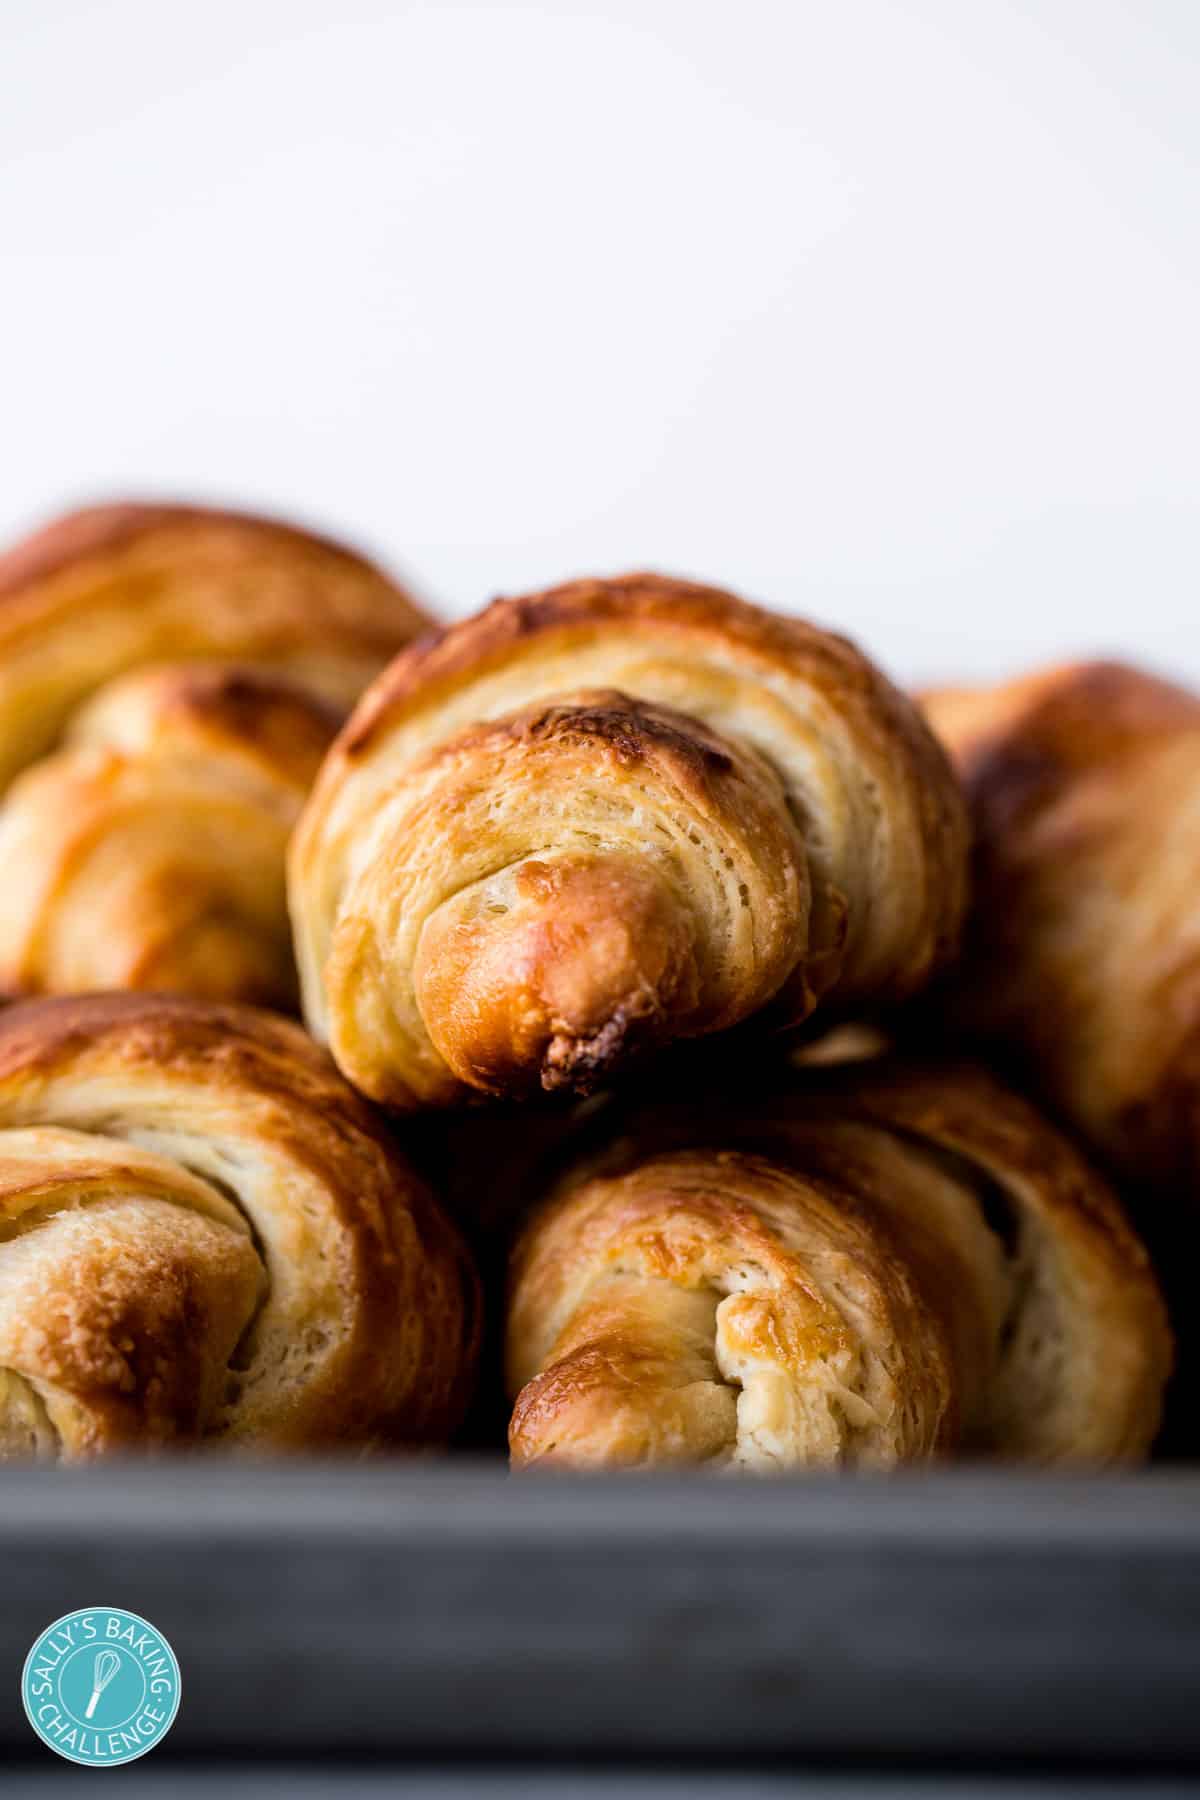 Homemade Croissants Recipe: How to Make It